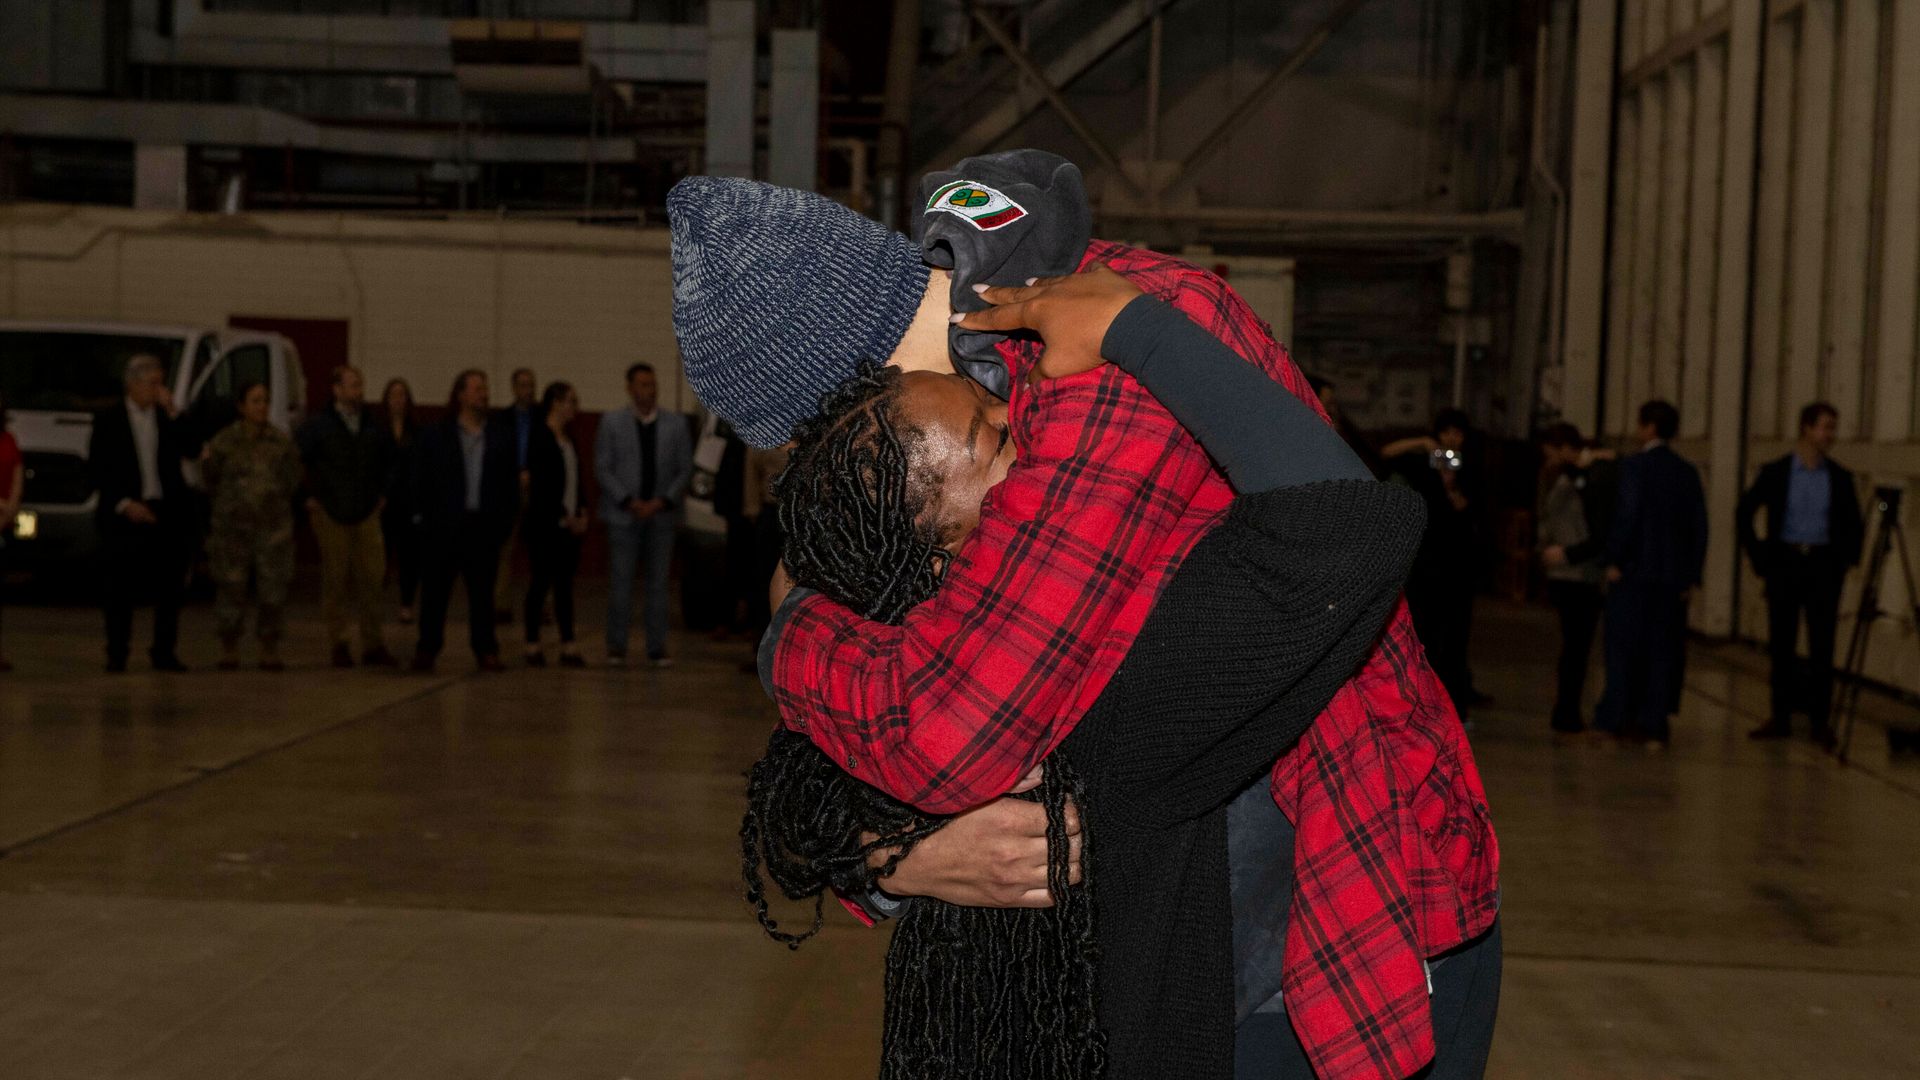 'I could finally exhale!' - Griner's wife reveals emotional reunion